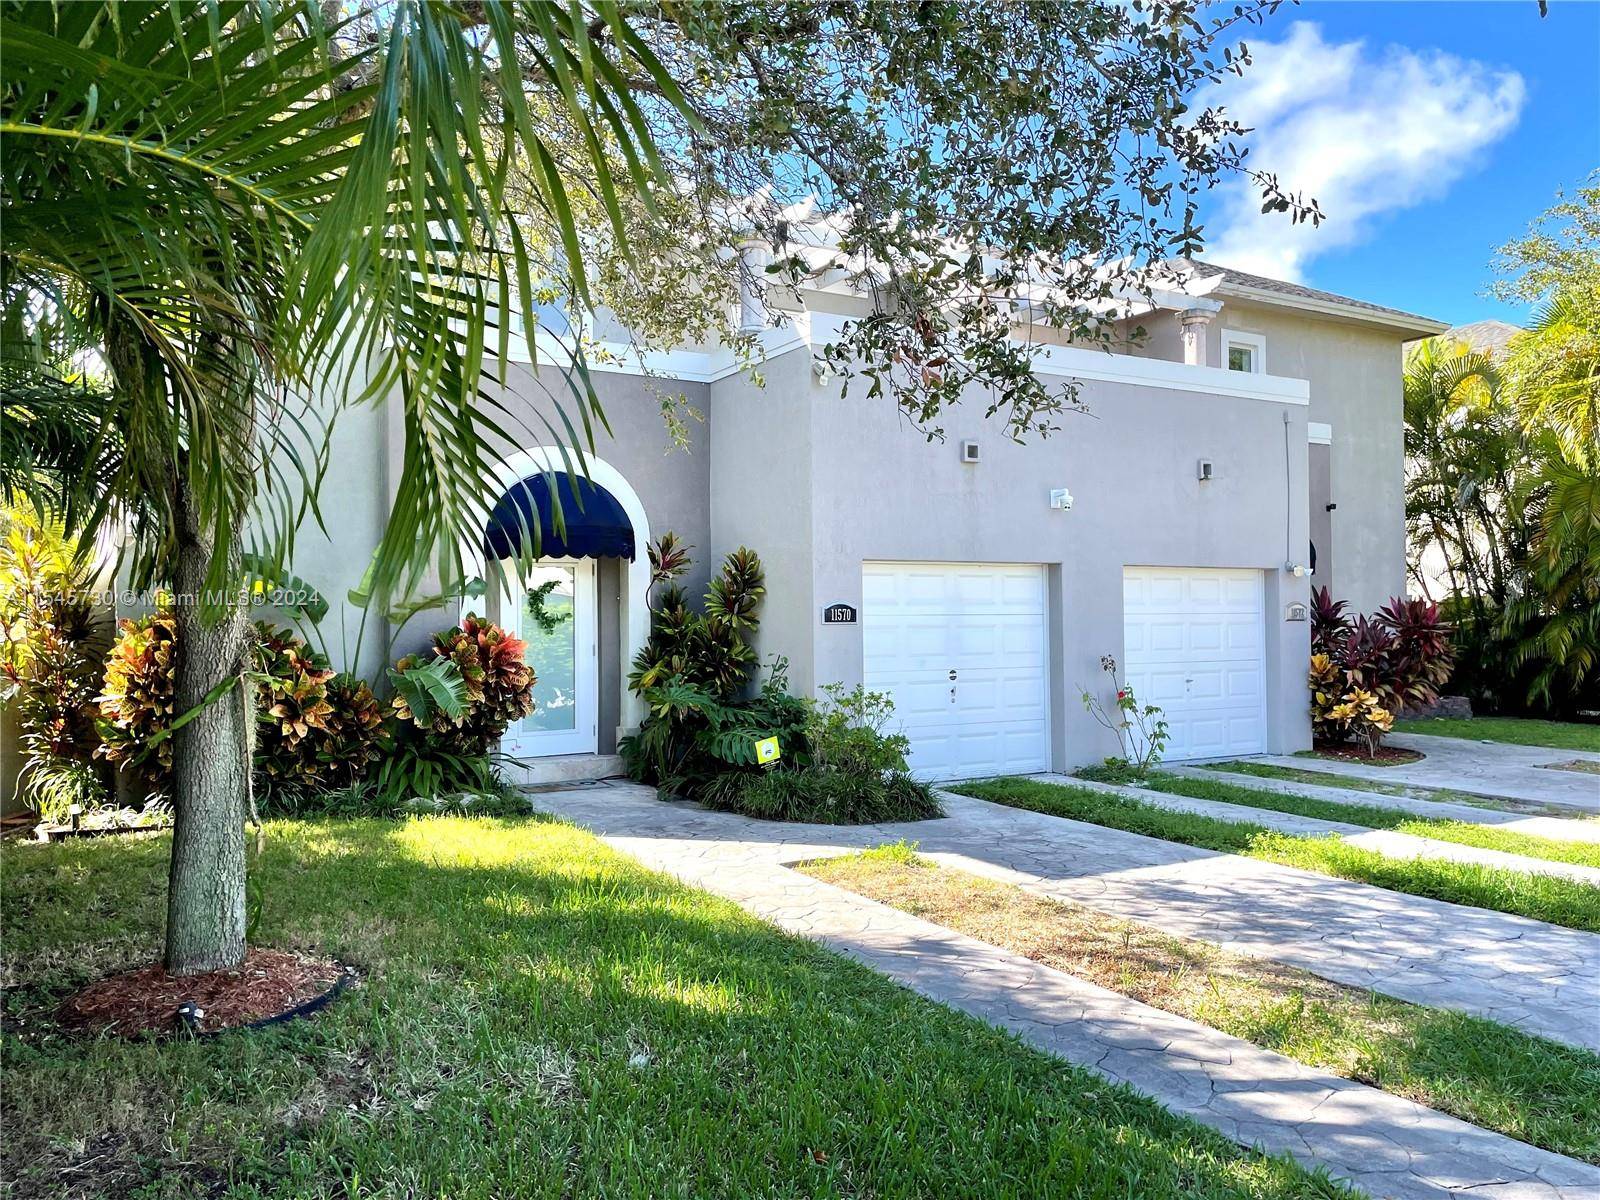 Lots to love ! Contemporary 2 story townhome in Biscayne Park Miami Shores area, minutes from every convenience.